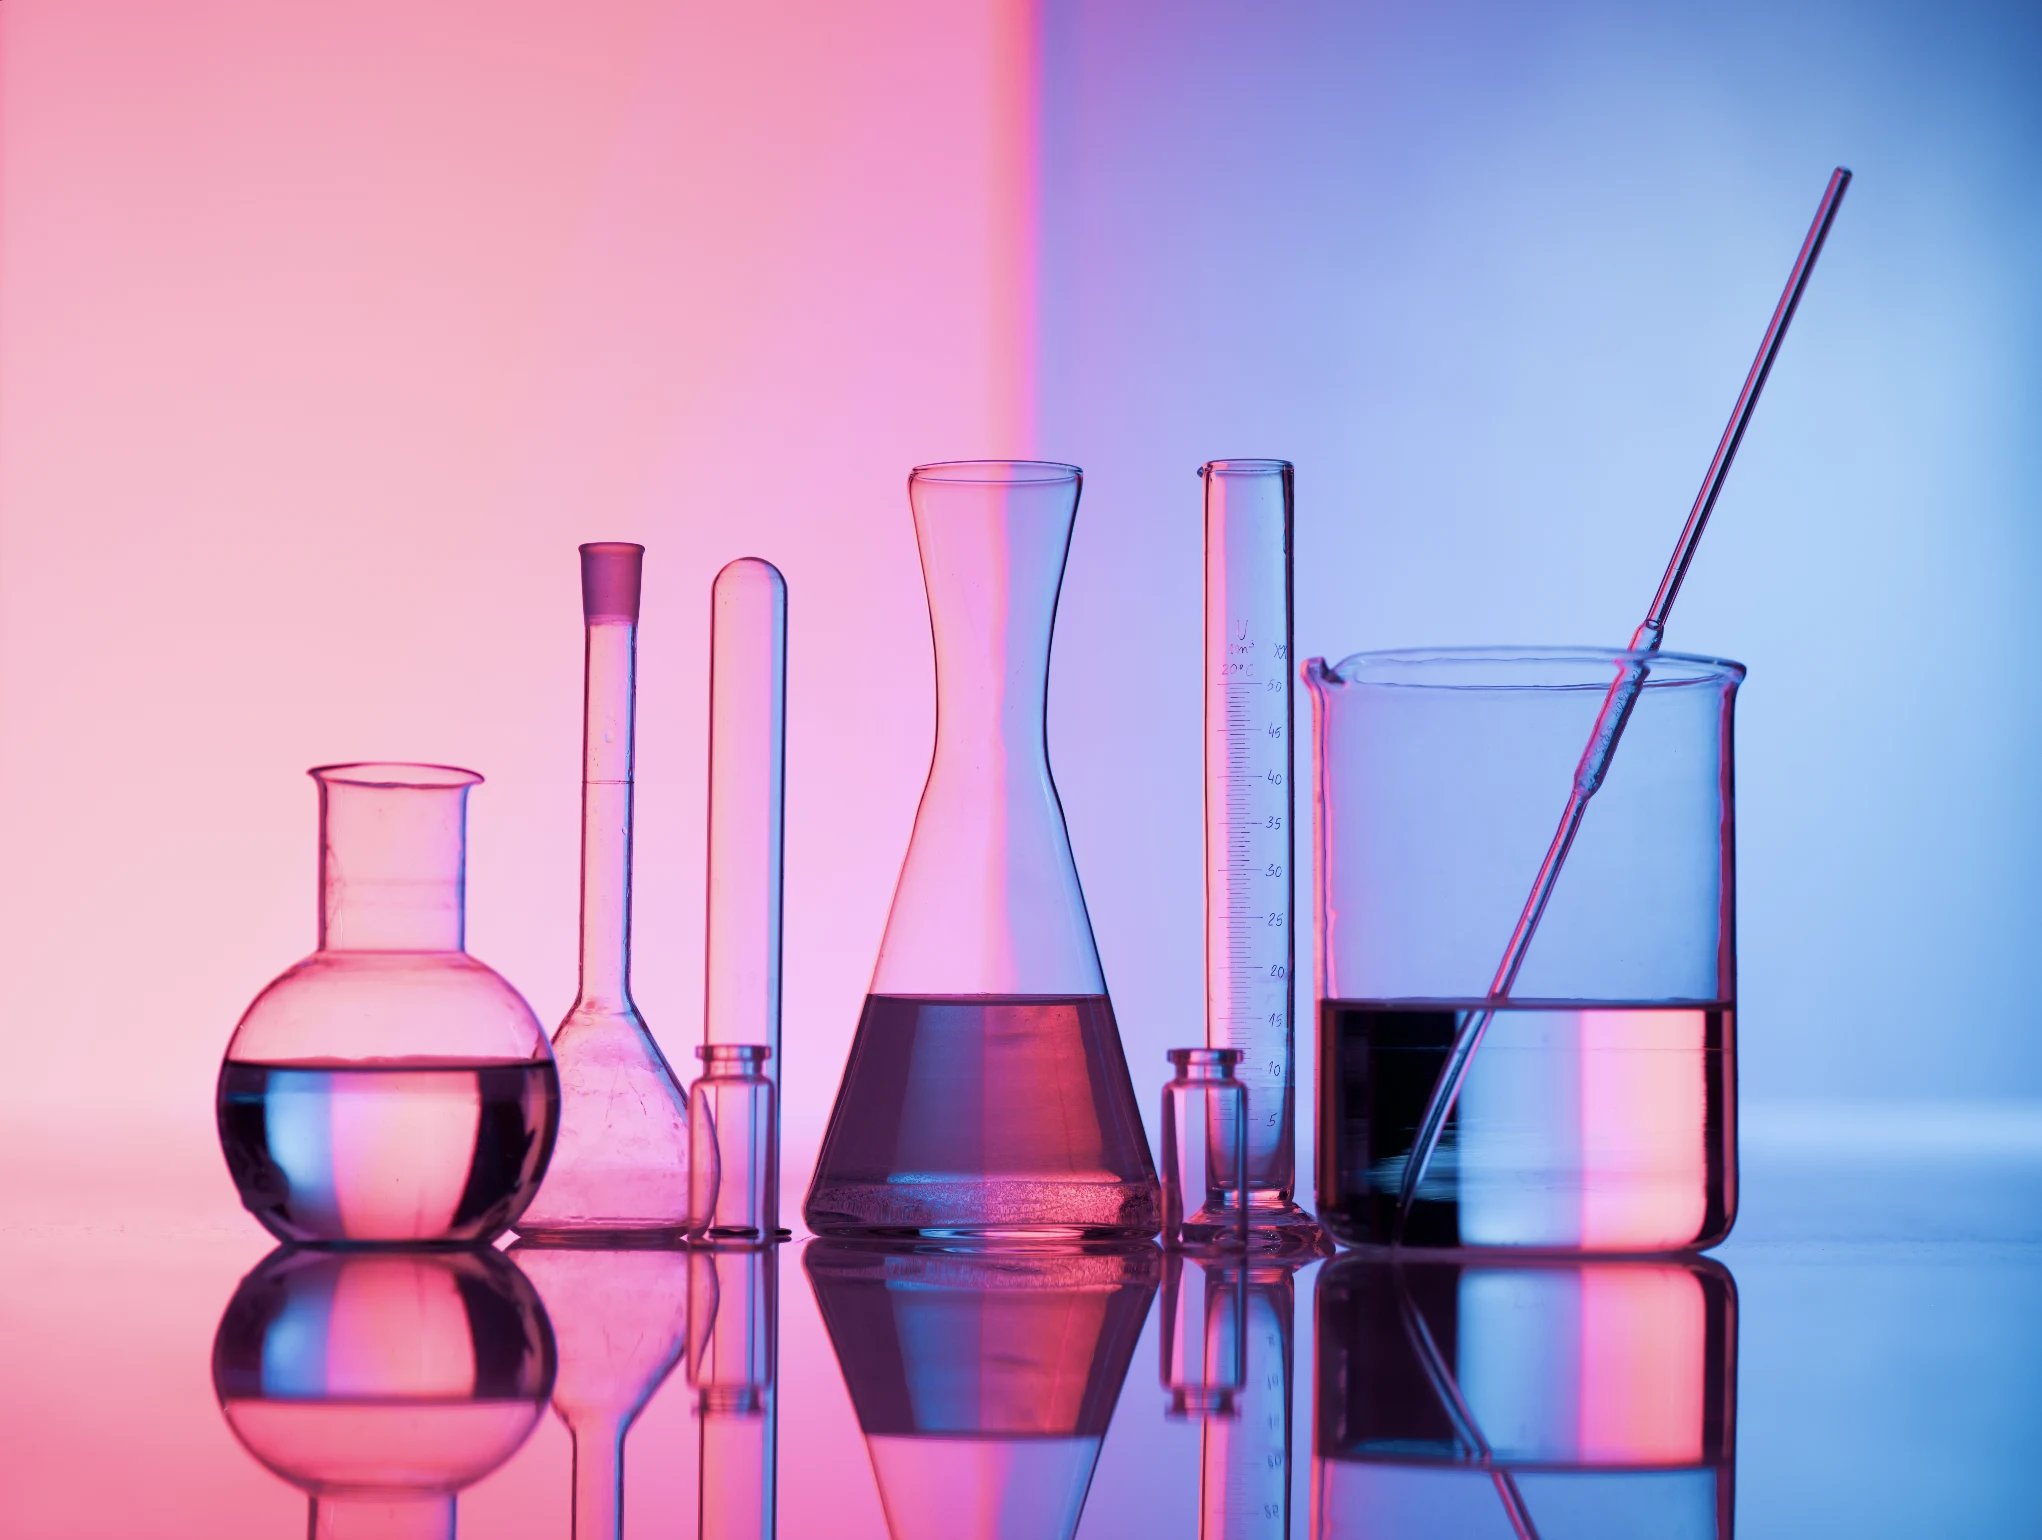 Laboratory glassware with colored solutions, representing our work in chemical research and innovation.